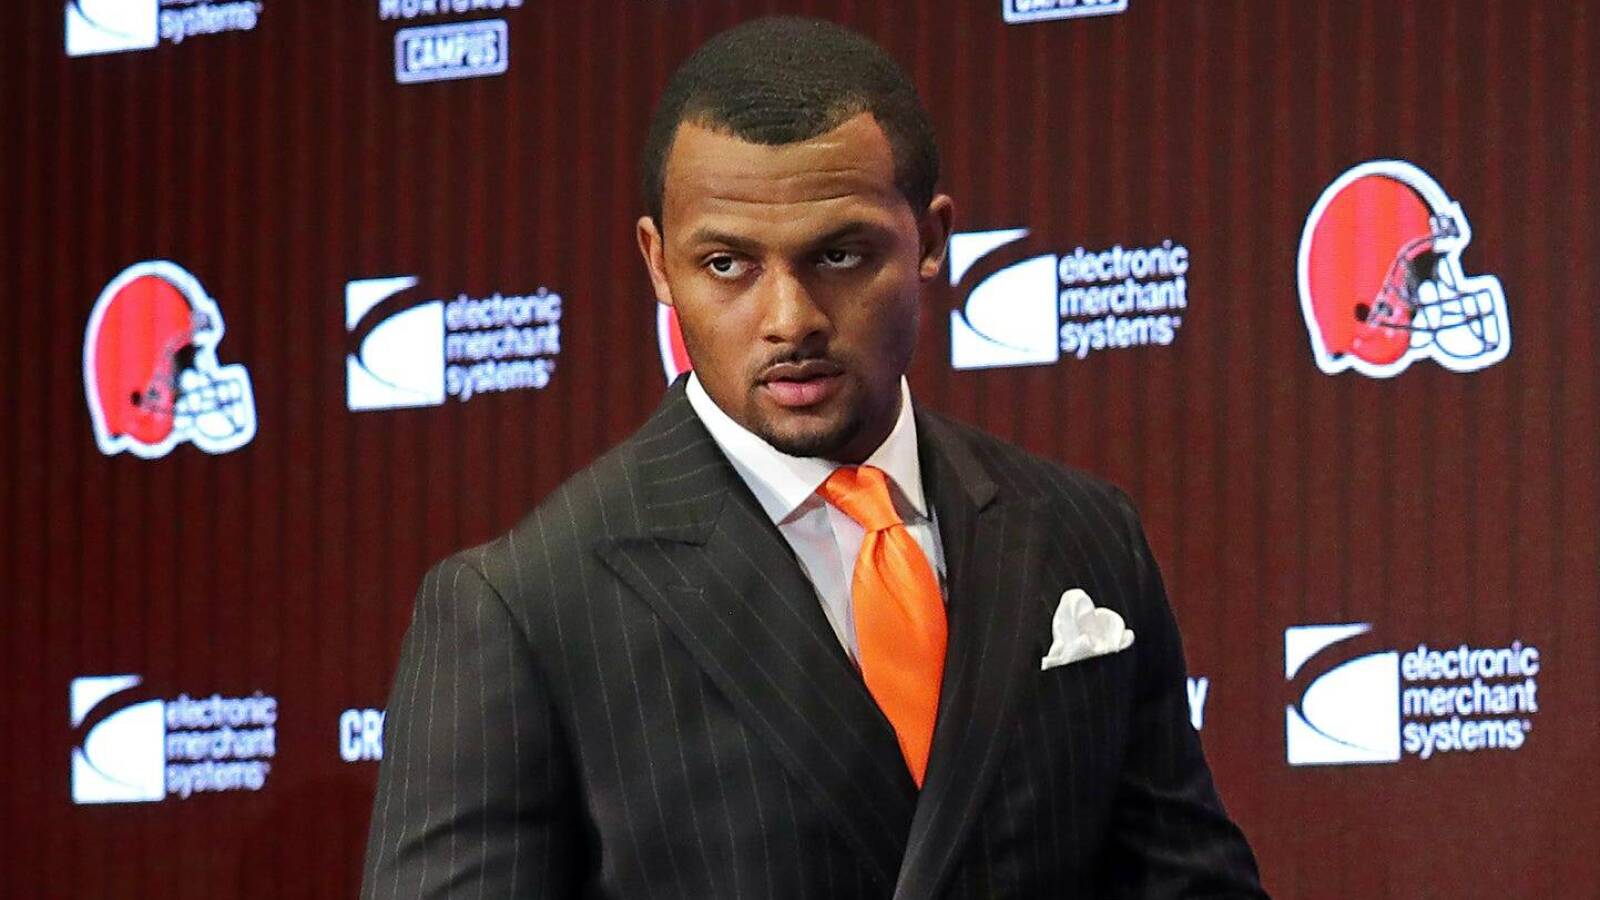 Women suing Deshaun Watson to be featured on HBO’s 'Real Sports with Bryant Gumbel'